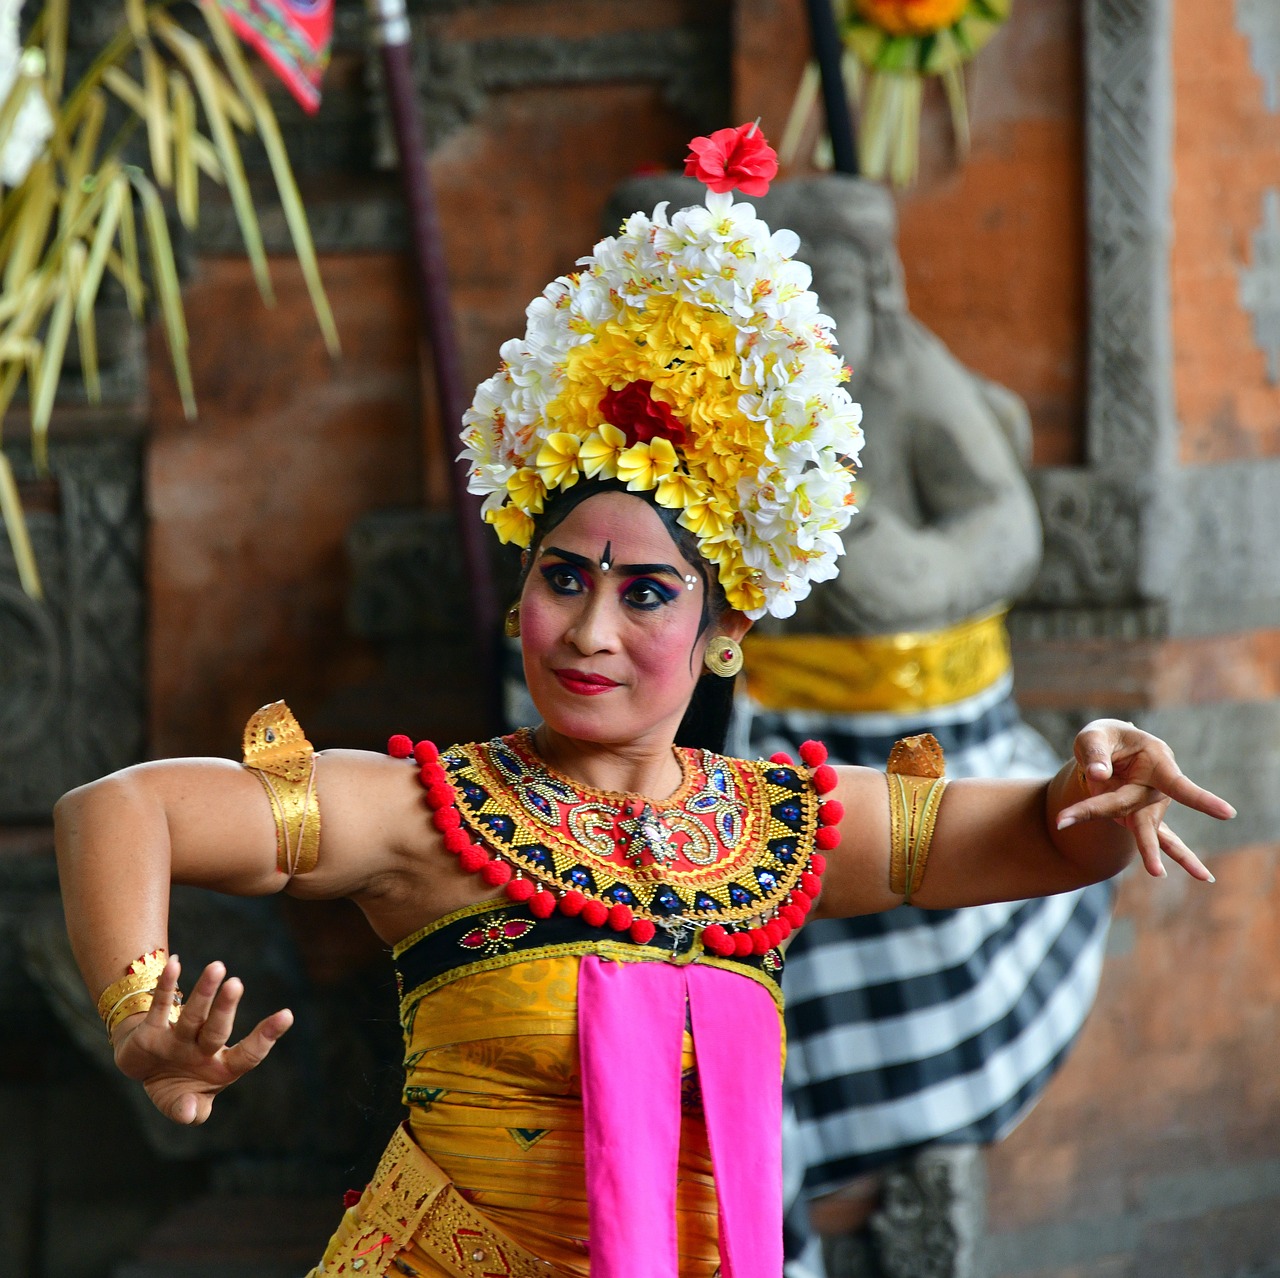 a close up of a person in a costume, inspired by I Ketut Soki, pexels, she is dancing. realistic, indian temple, flower, centered in portrait